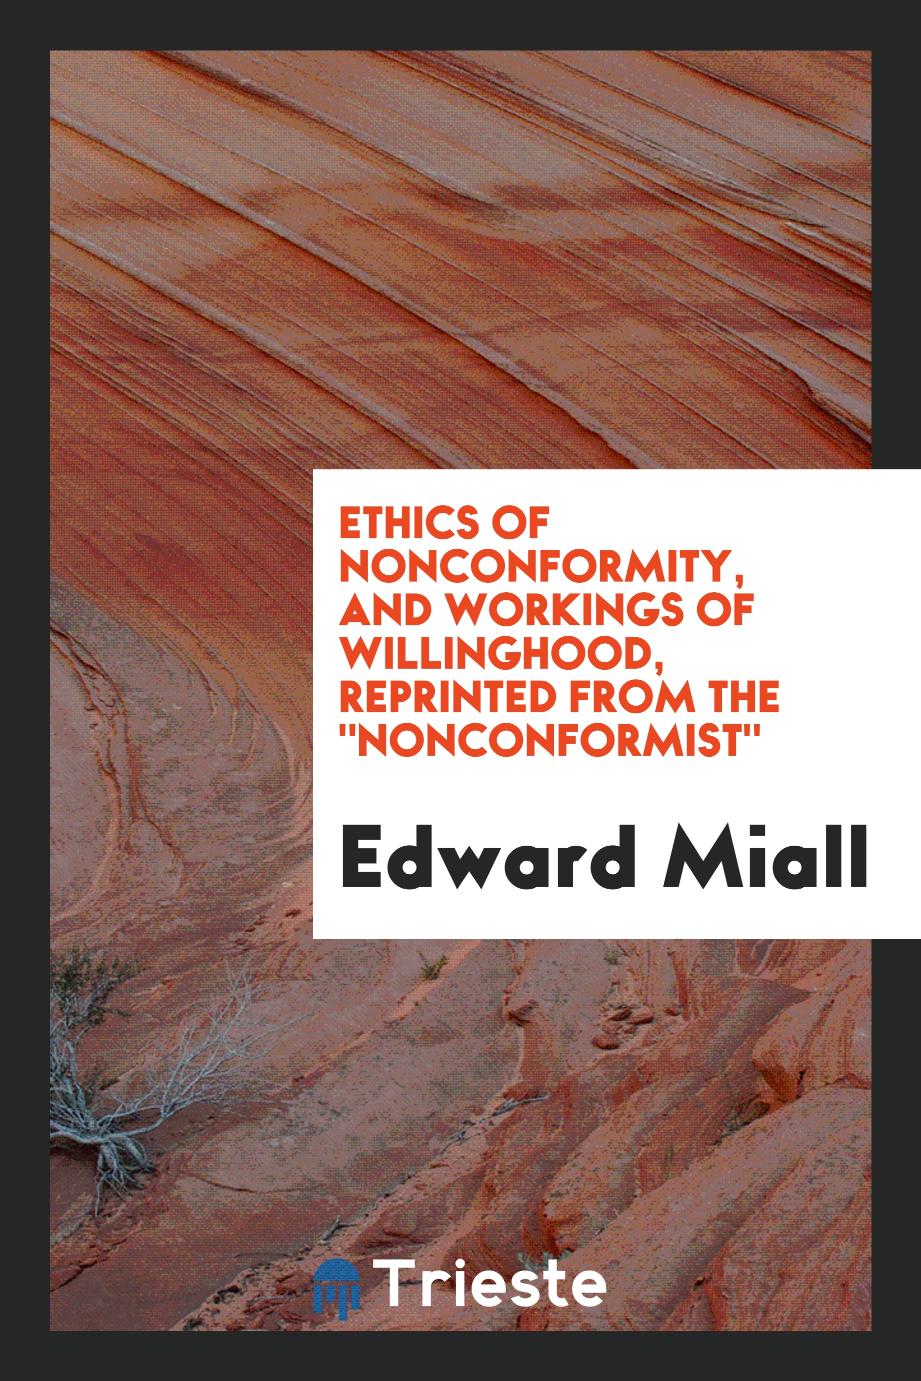 Ethics of Nonconformity, and Workings of Willinghood, Reprinted from the "Nonconformist"